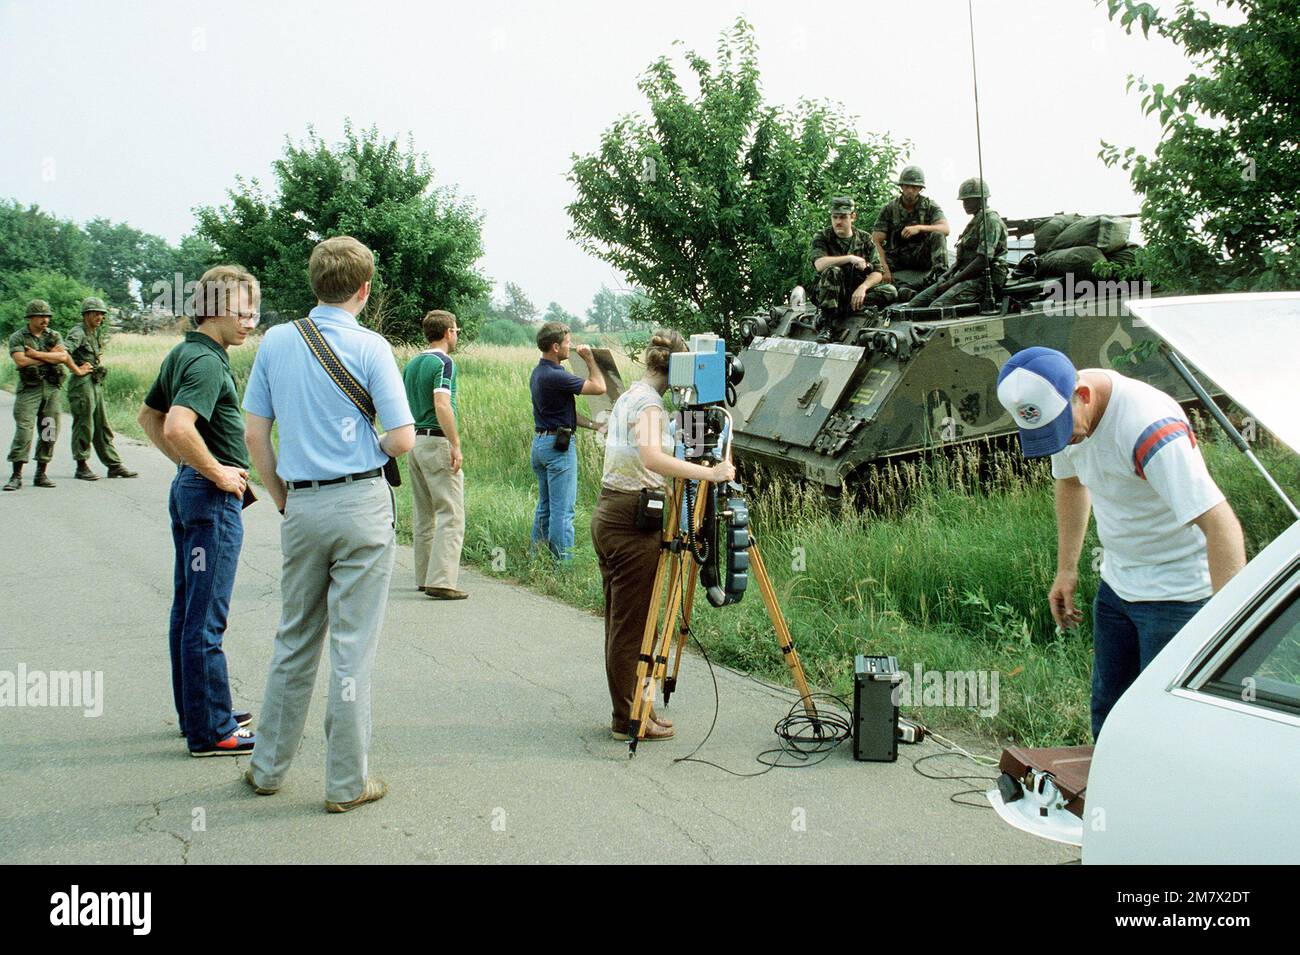 The U.S. Army Audio-Visual Center television conducts interviews with soldiers on an armored personnel carrier during Exercise Reforger '82. Subject Operation/Series: REFORGER '82 Base: Fort Riley State: Kansas (KS) Country: United States Of America (USA) Stock Photo